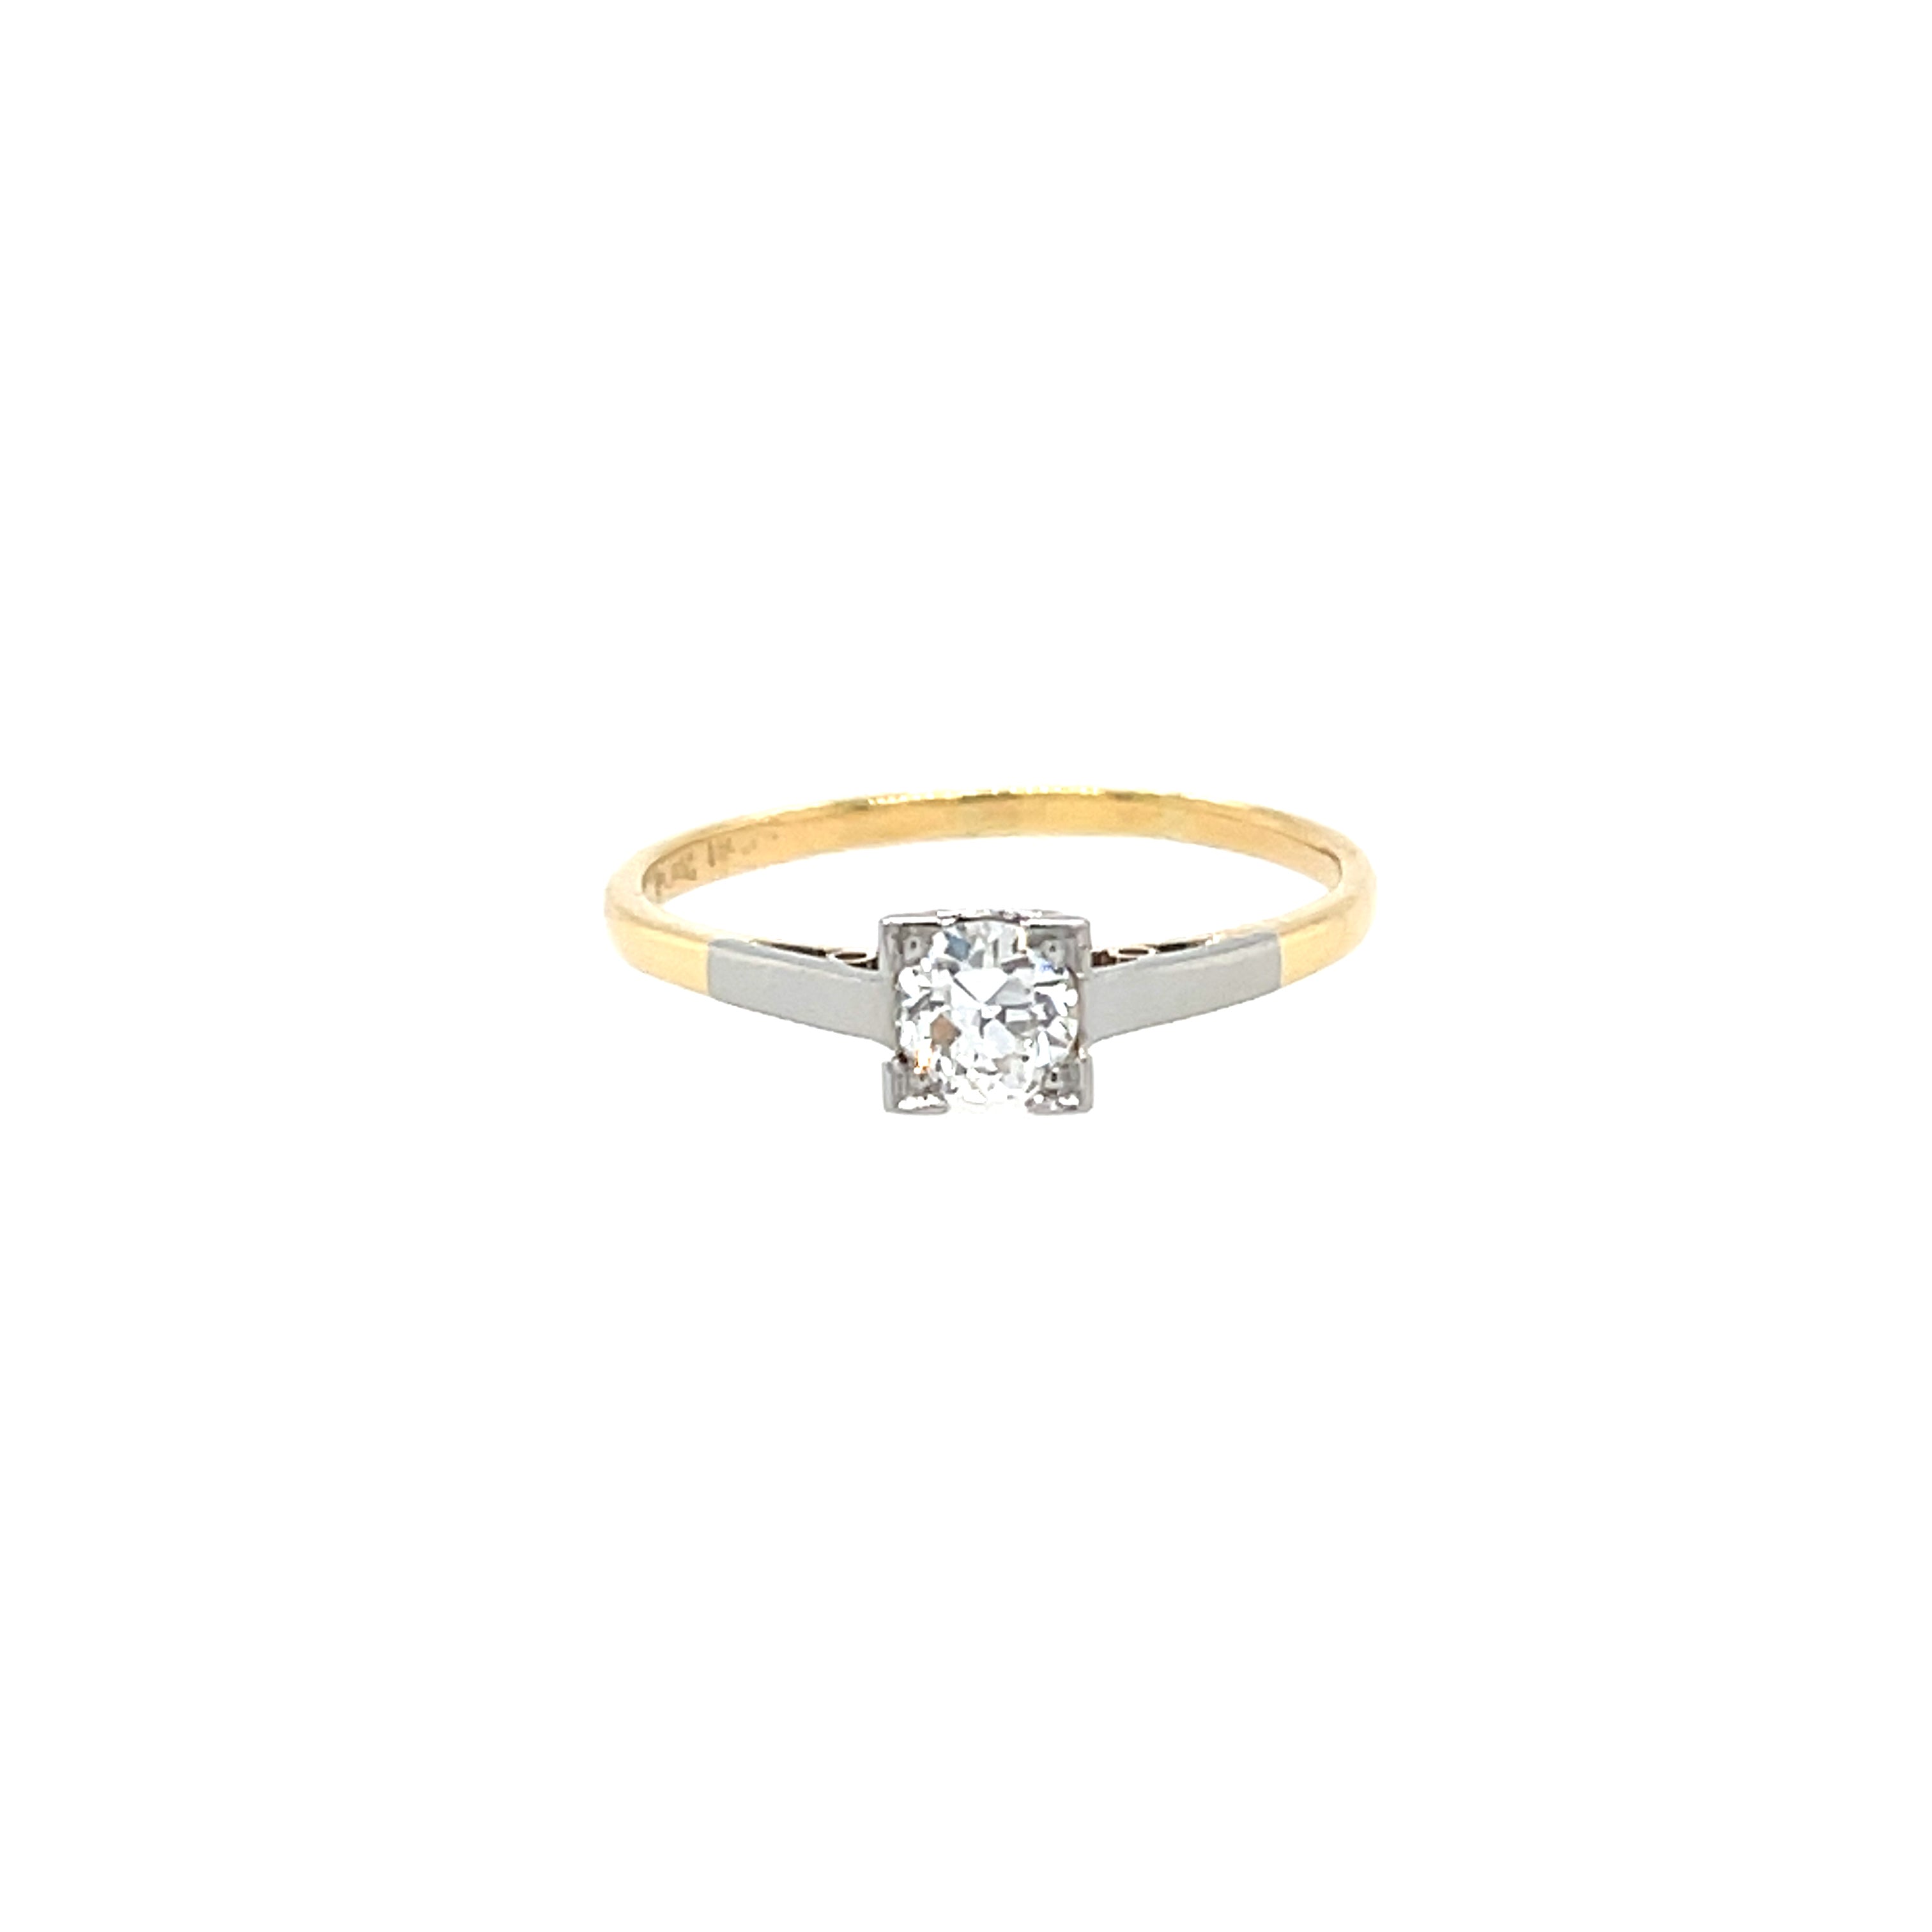 Antique 18ct Yellow Gold & Platinum 0.30ct Old Brilliant Cut Diamond Solitaire Engagement Ring Certified H VS